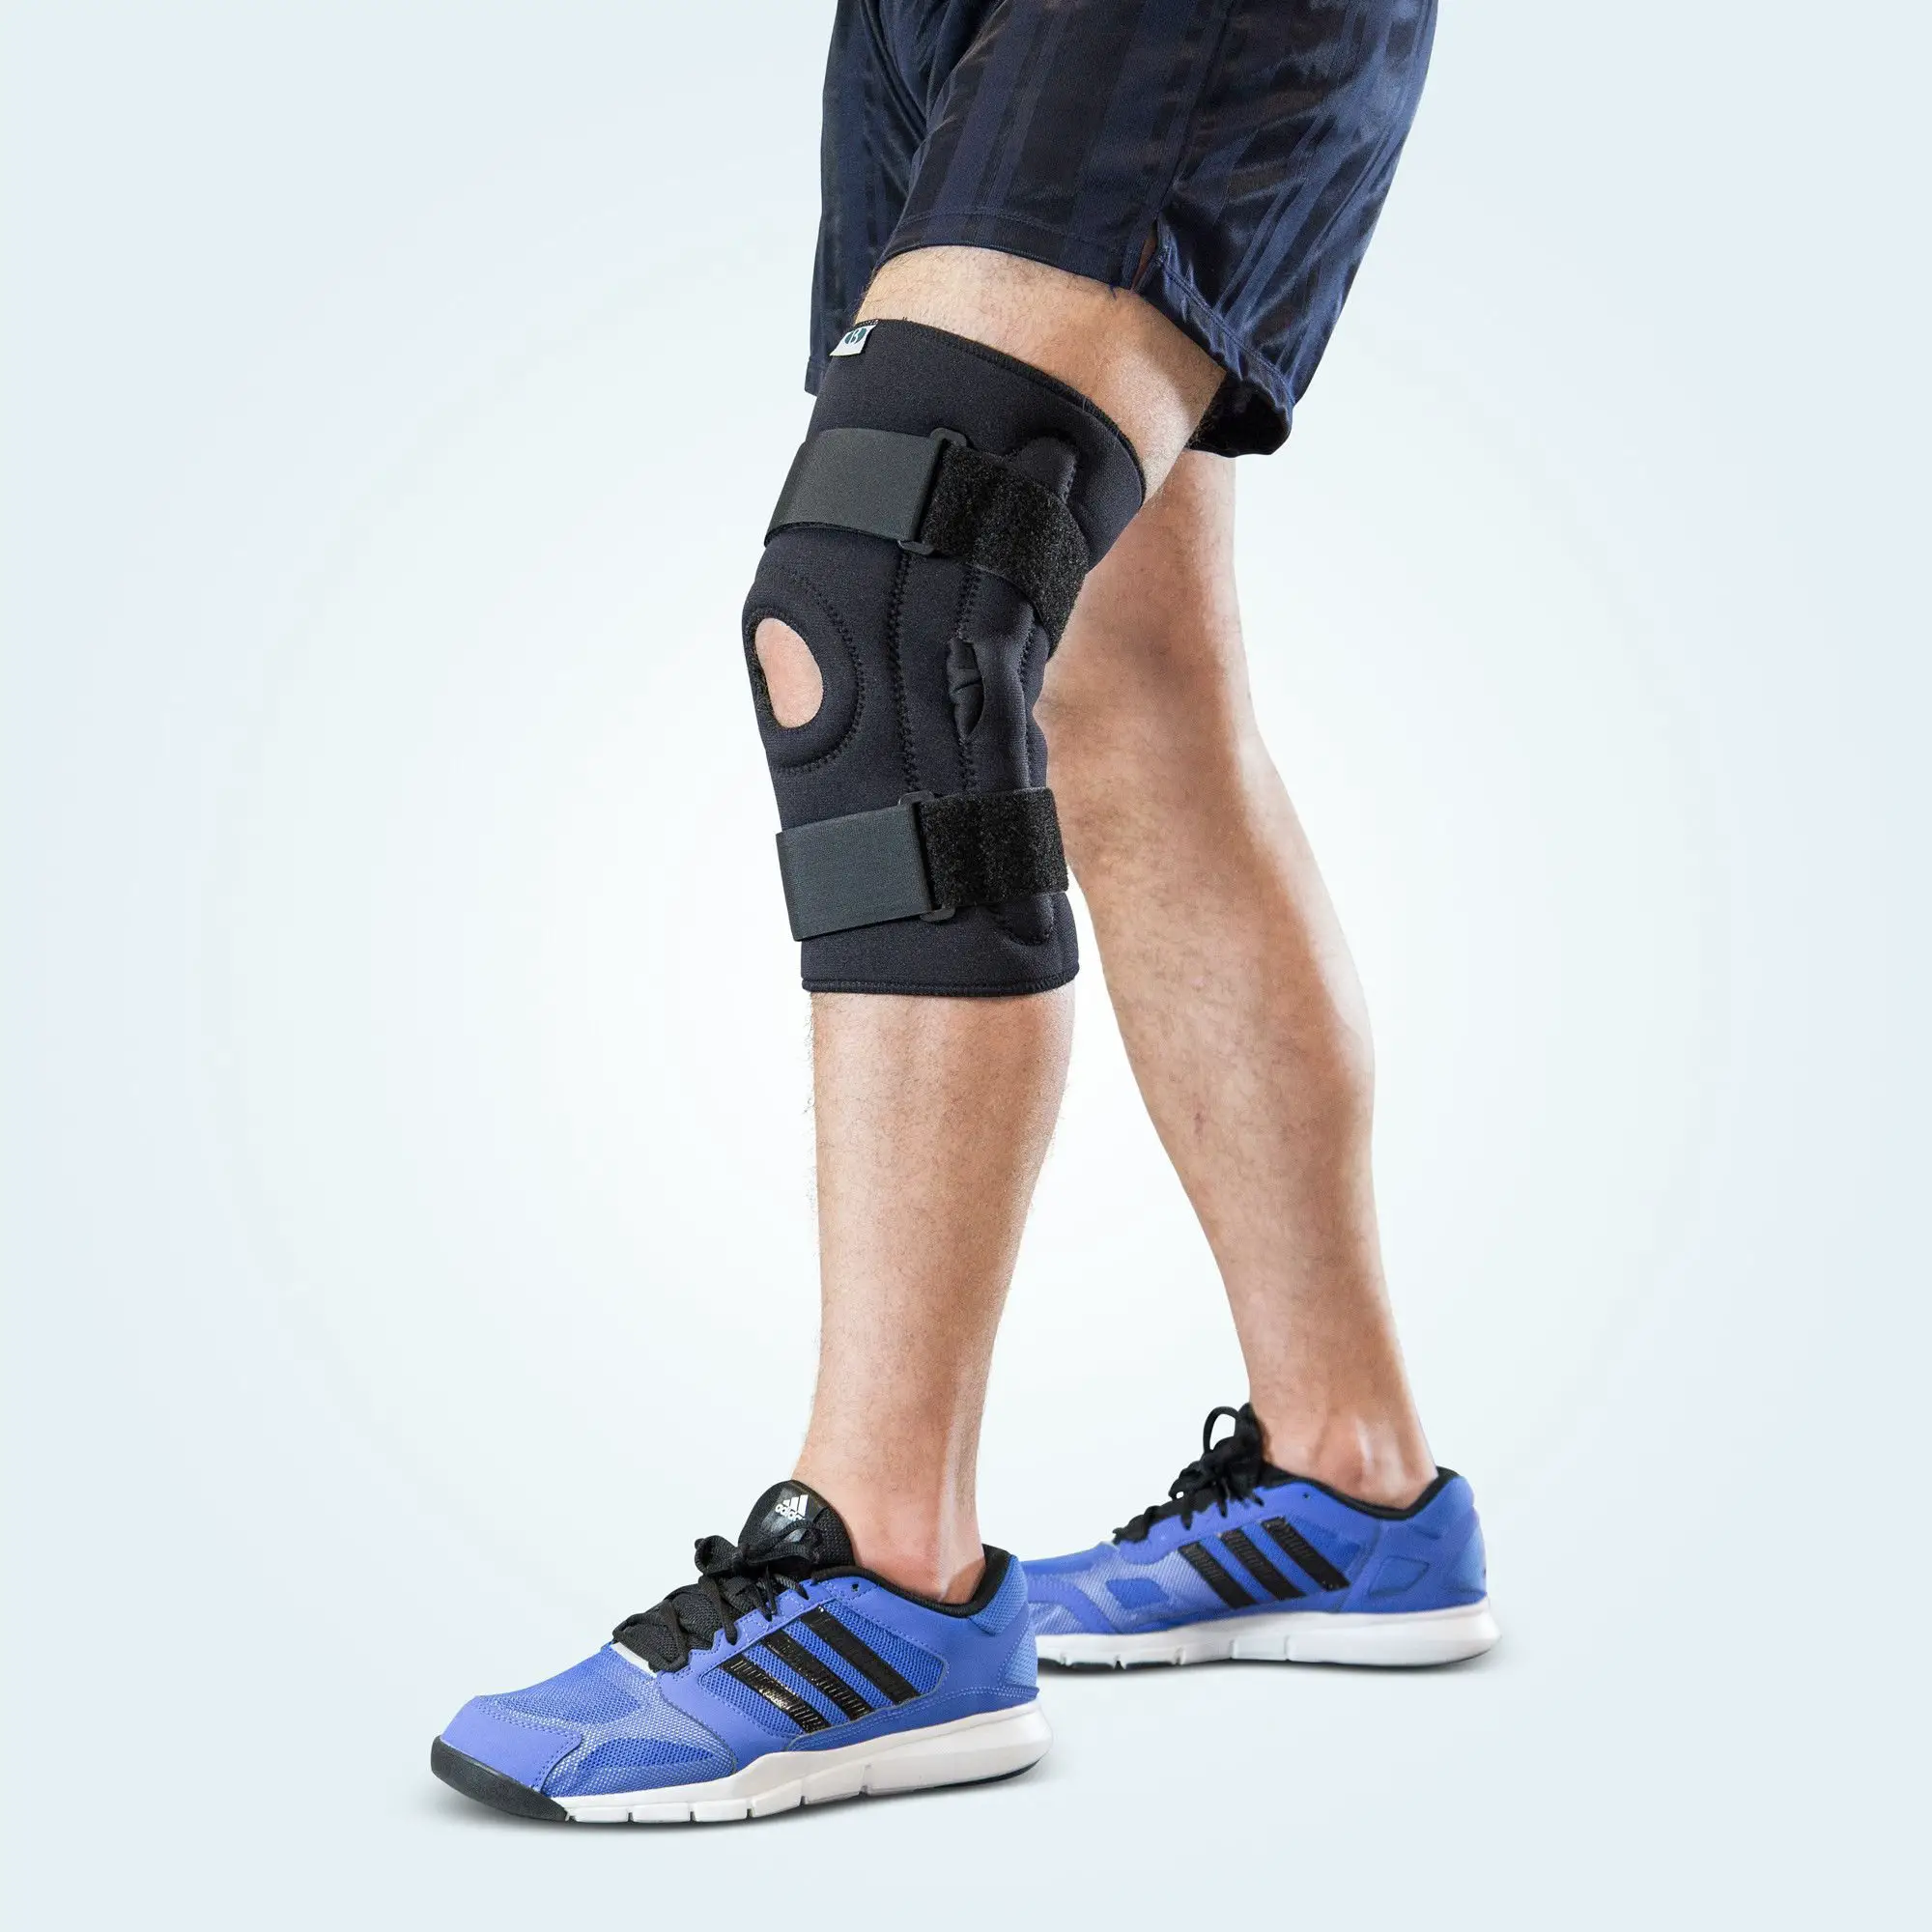 Arsa Medicare KNEE SUPPORT BRACE WITH OPEN PATELLA